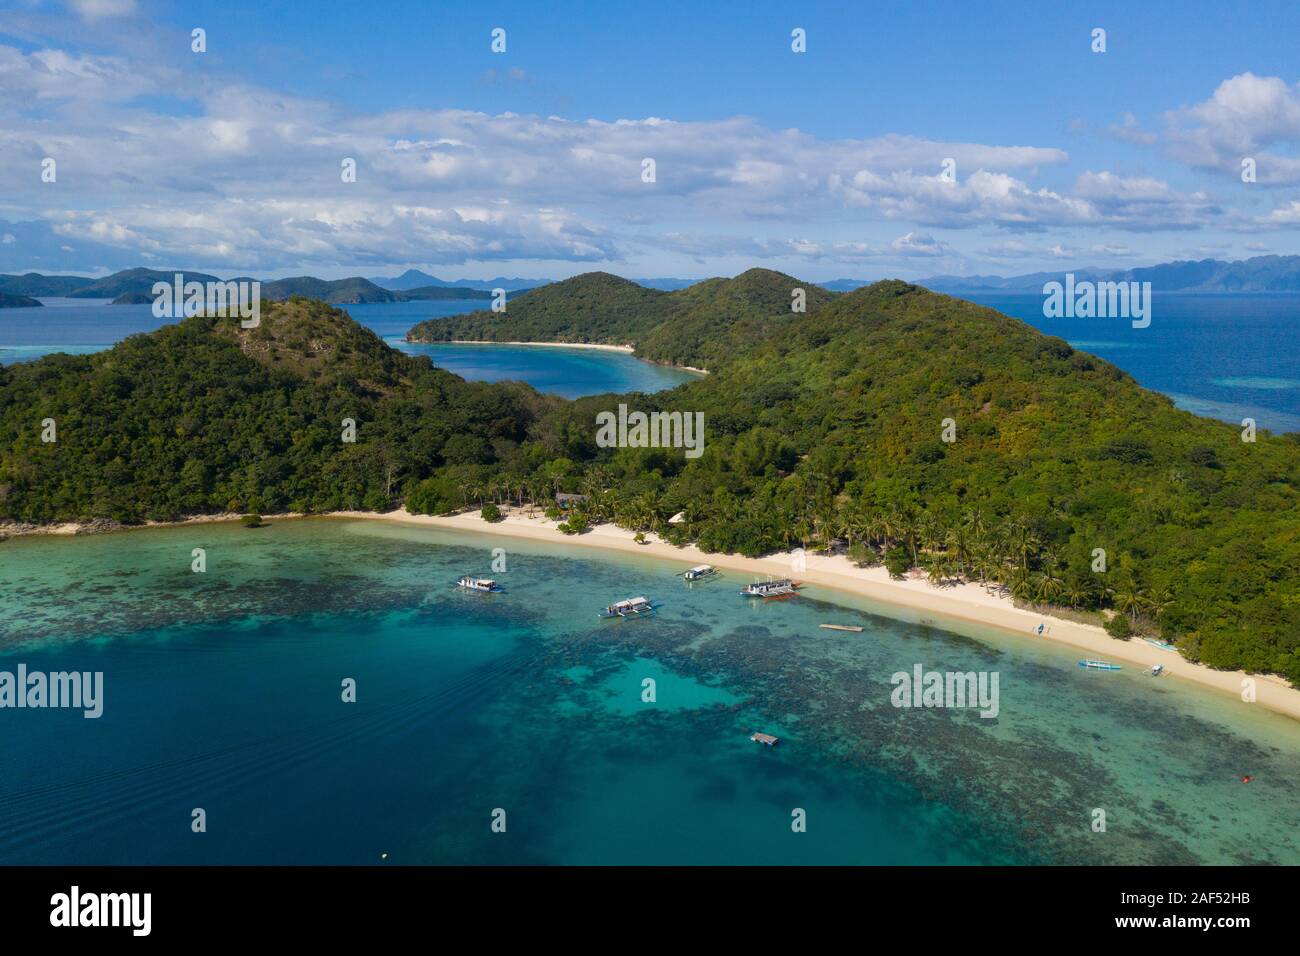 Aerial view of Island Hopping destination known as Coco Beach,Coron,Palawan,Philippines Stock Photo